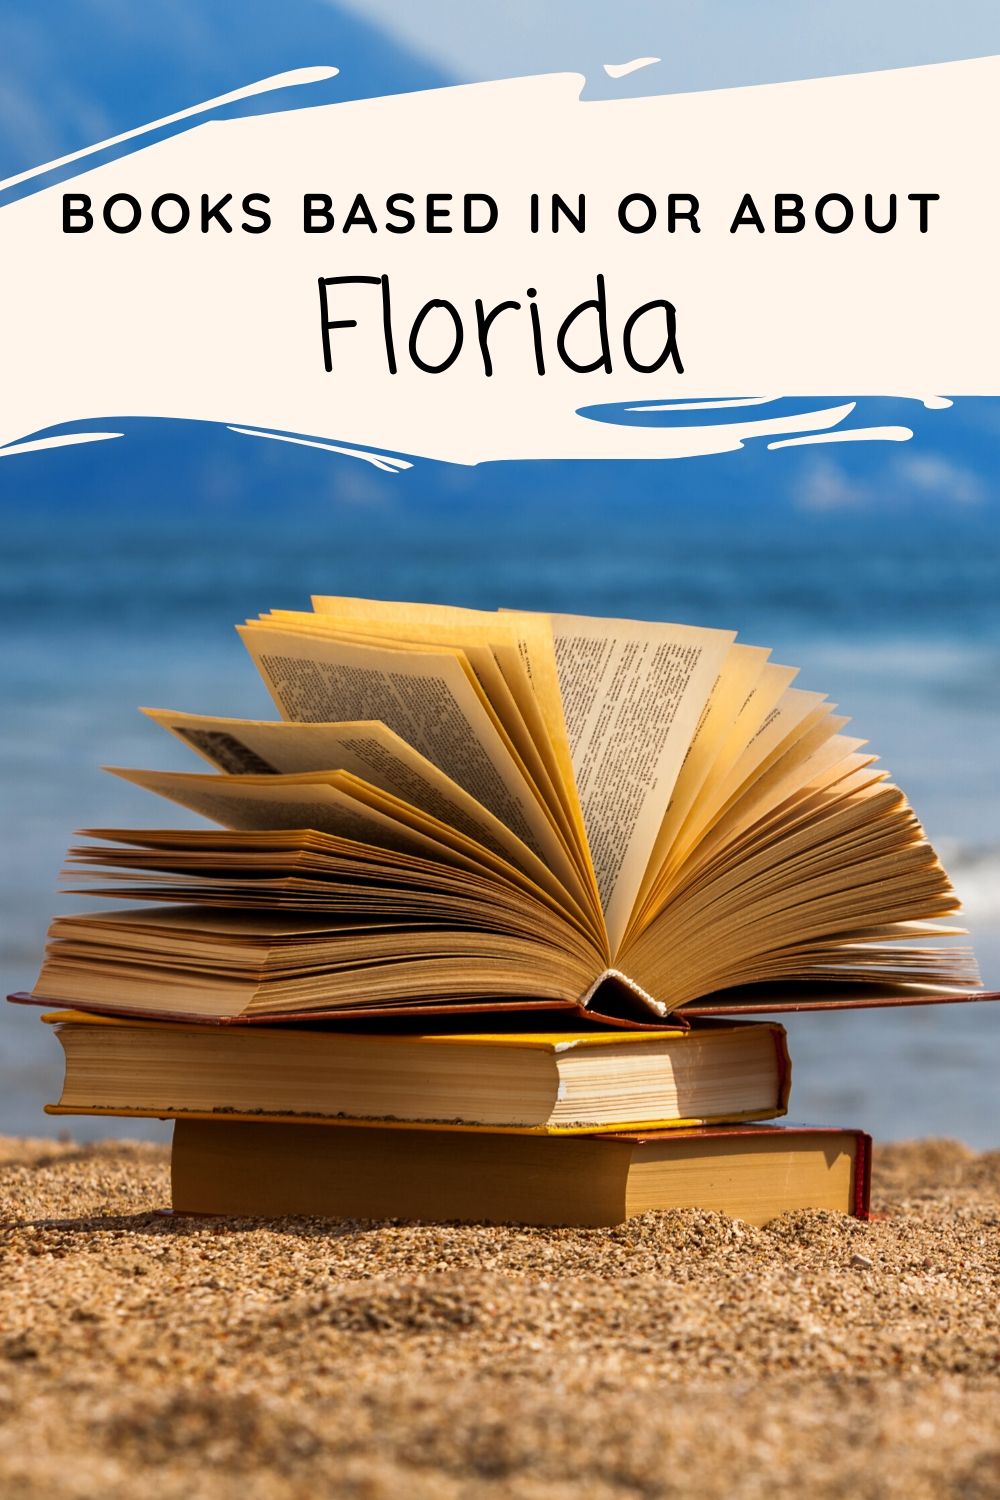 When we dive into a state unit study I have fun putting together the books for not just my kids but for me too. Here are our top Florida Books picks. #ourroaminghearts #florida #books #reading #roadschooling #unitstudy | Roadschooling | Books about Florida | Books based in Florida | Florida Unit Study |